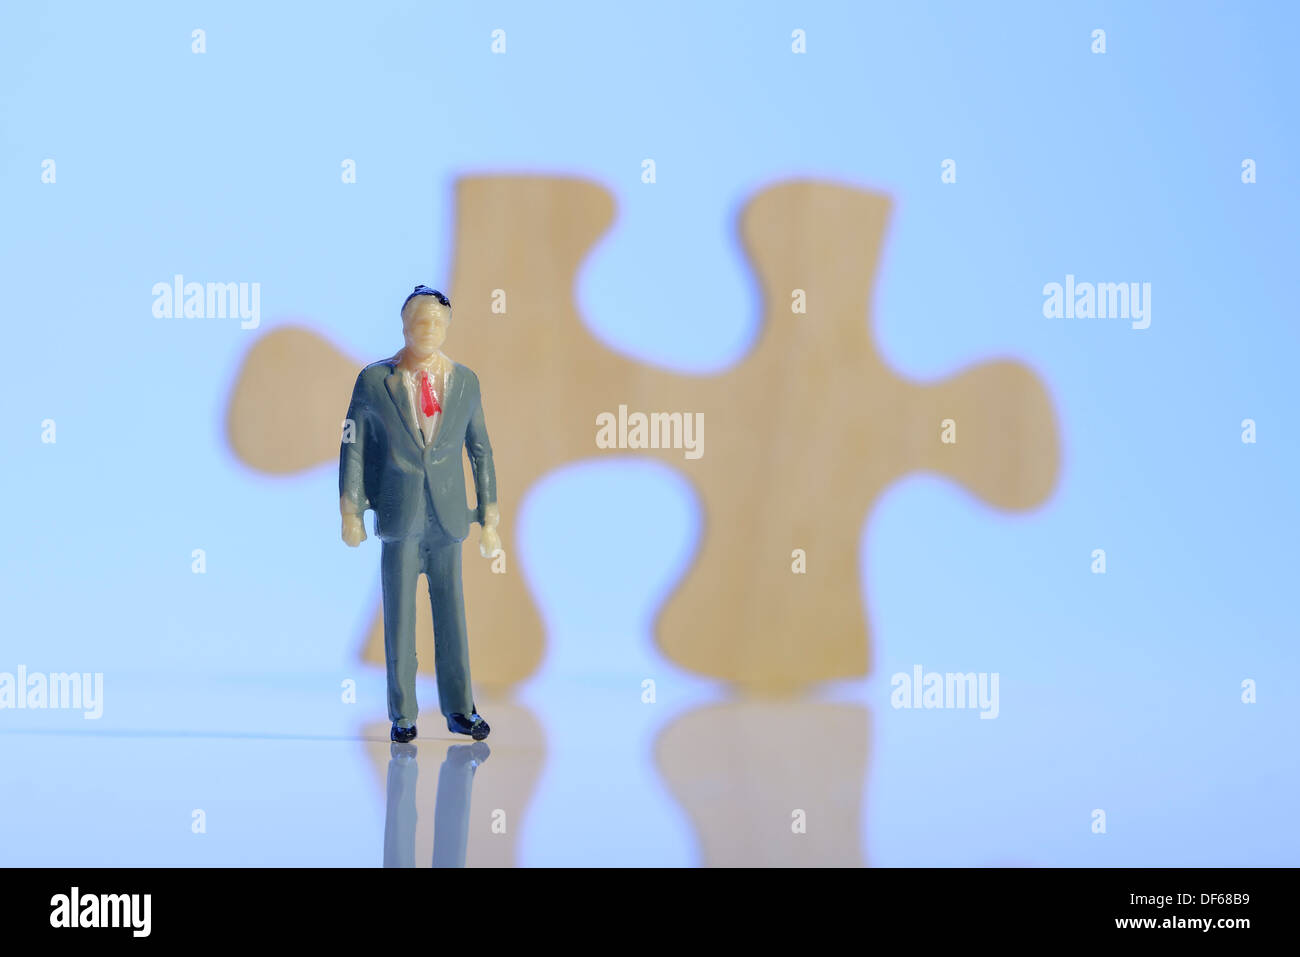 Plastic business man standing in front of a wooden jigsaw piece Stock Photo